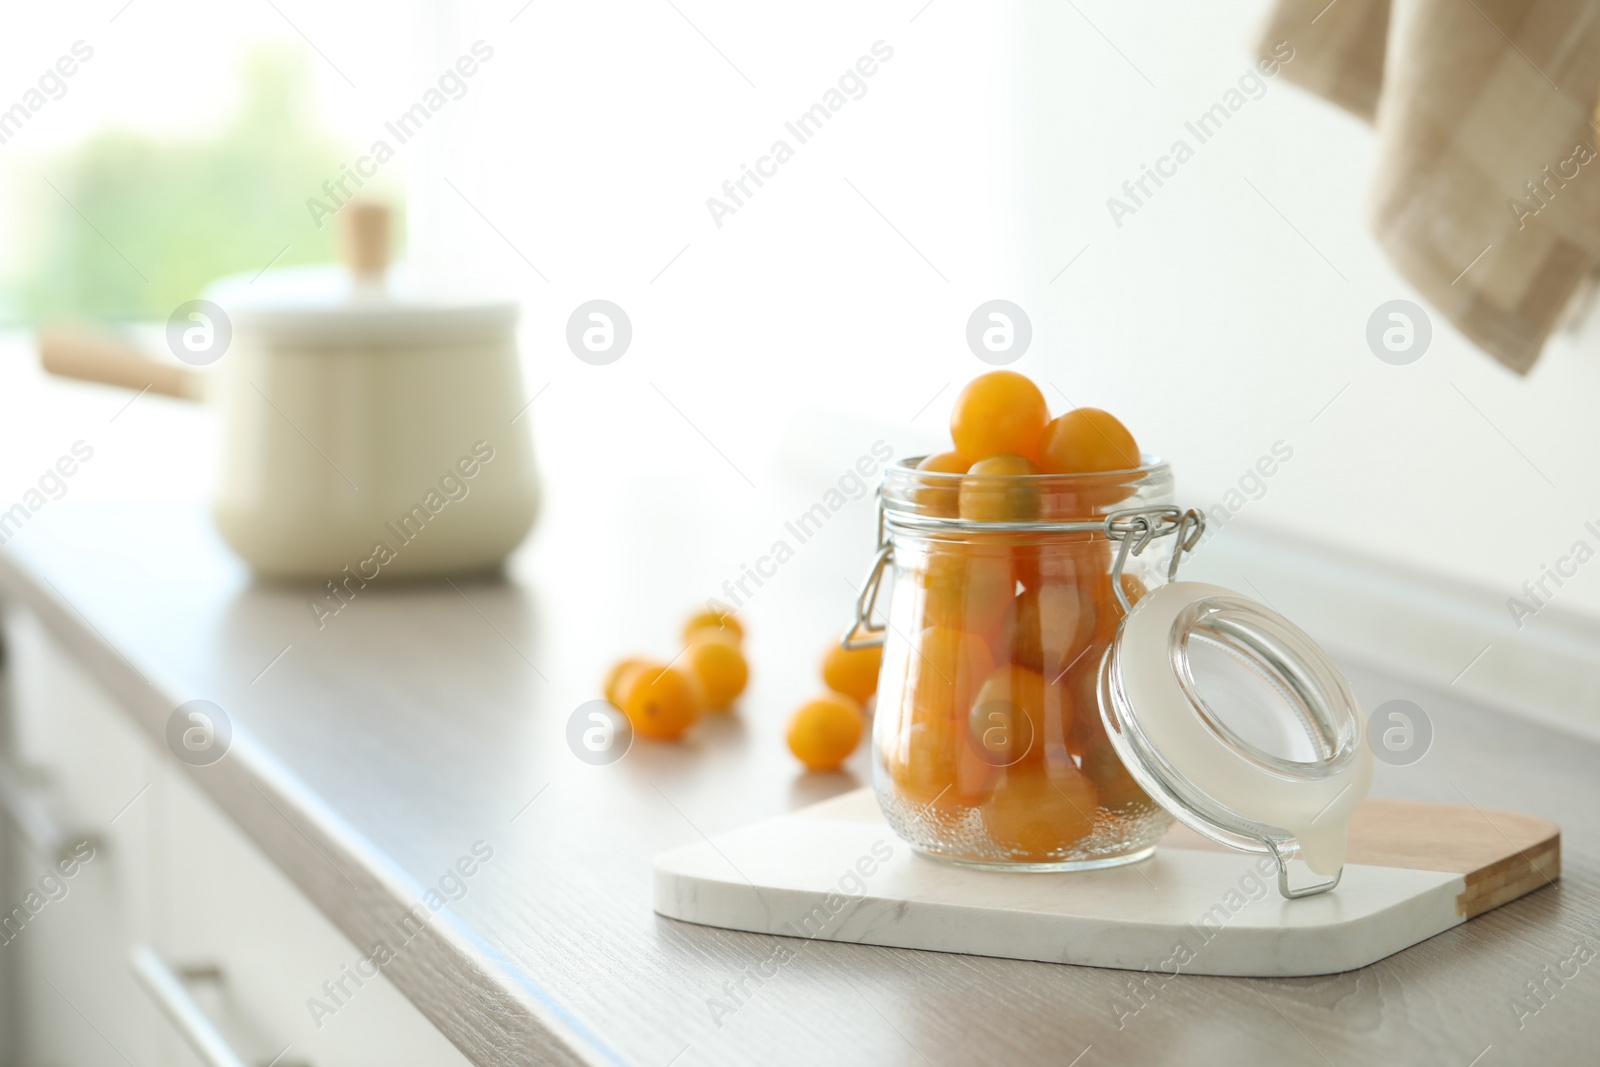 Photo of Pickling jar with fresh tomatoes on counter in kitchen. Space for text